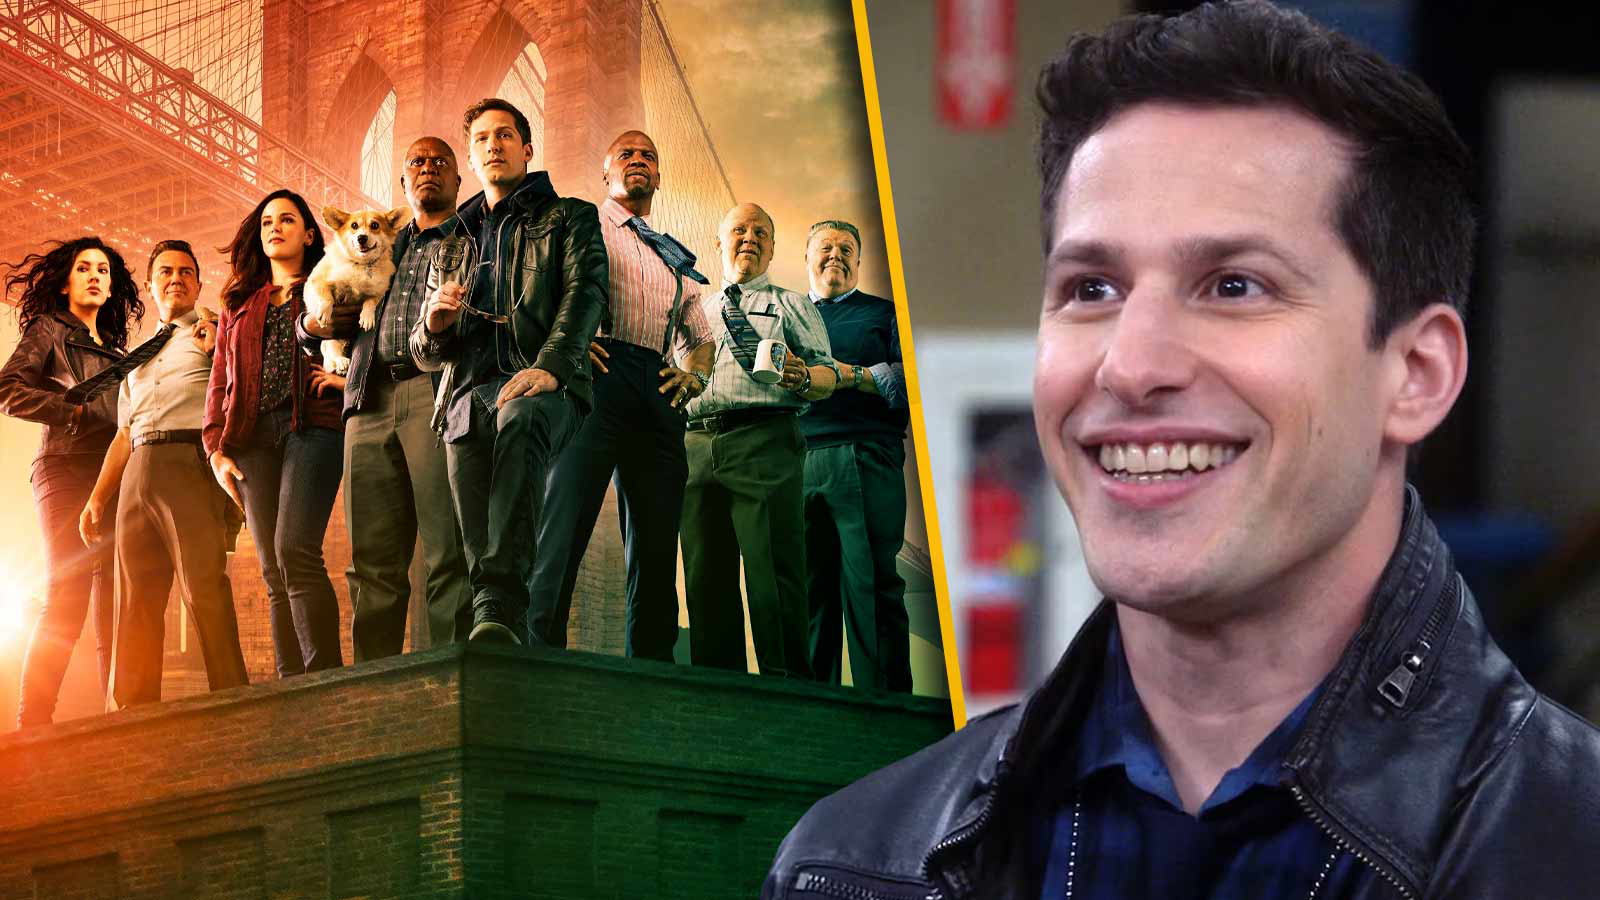 “Everybody wants to go home”: Brooklyn Nine-Nine’s Most Enchanting Scene Was a Total Nightmare to Film, Leaving the Cast Desperate For an Escape